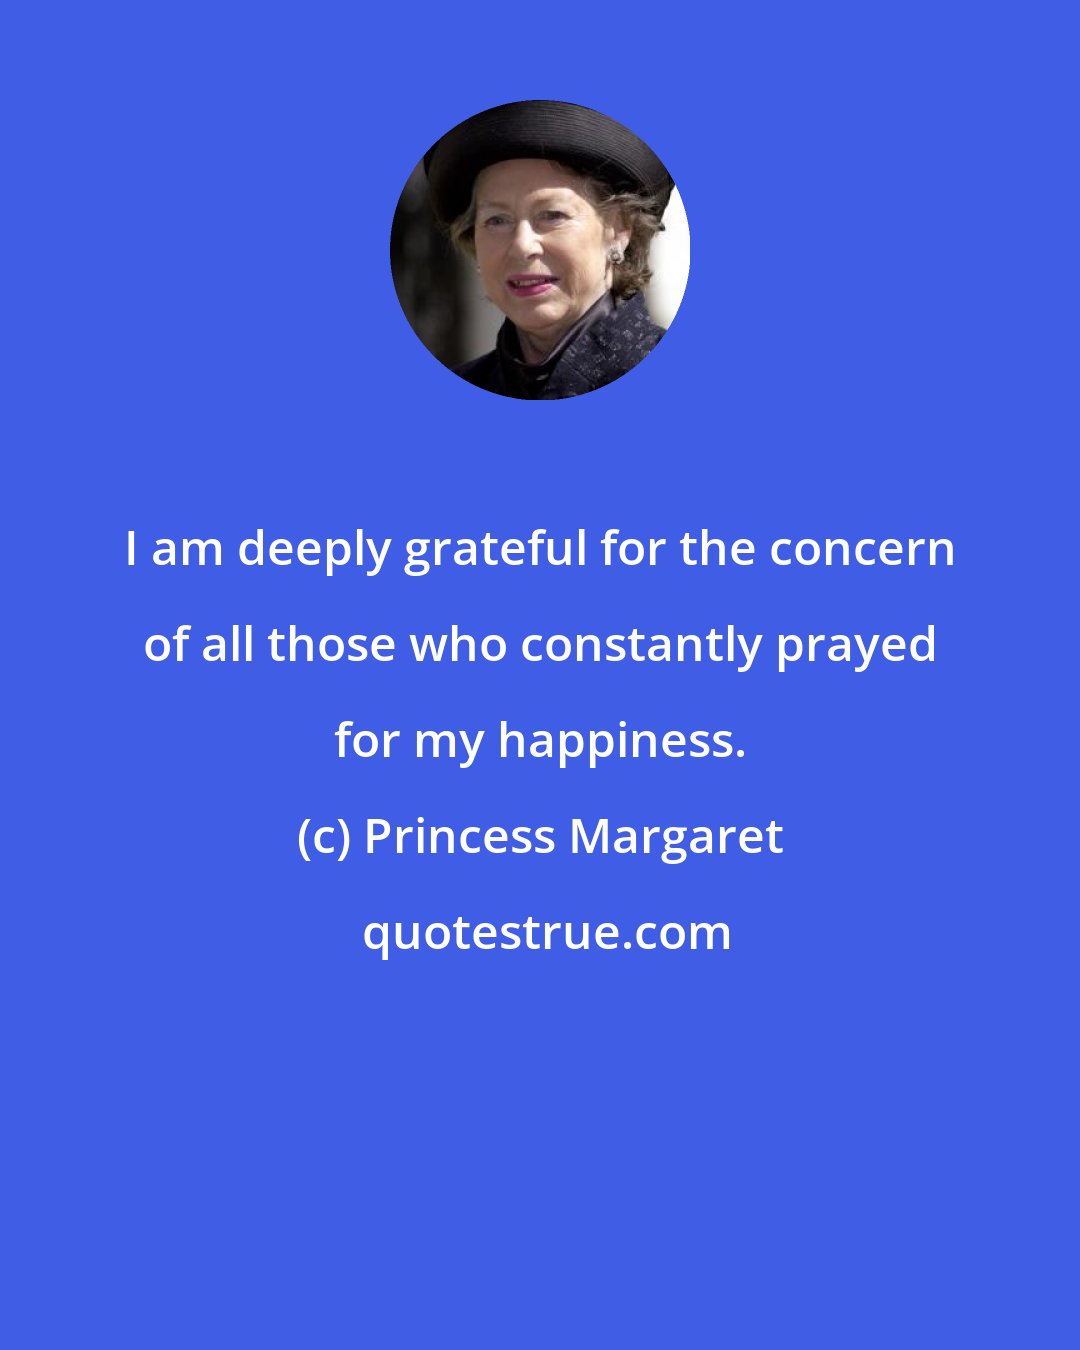 Princess Margaret: I am deeply grateful for the concern of all those who constantly prayed for my happiness.